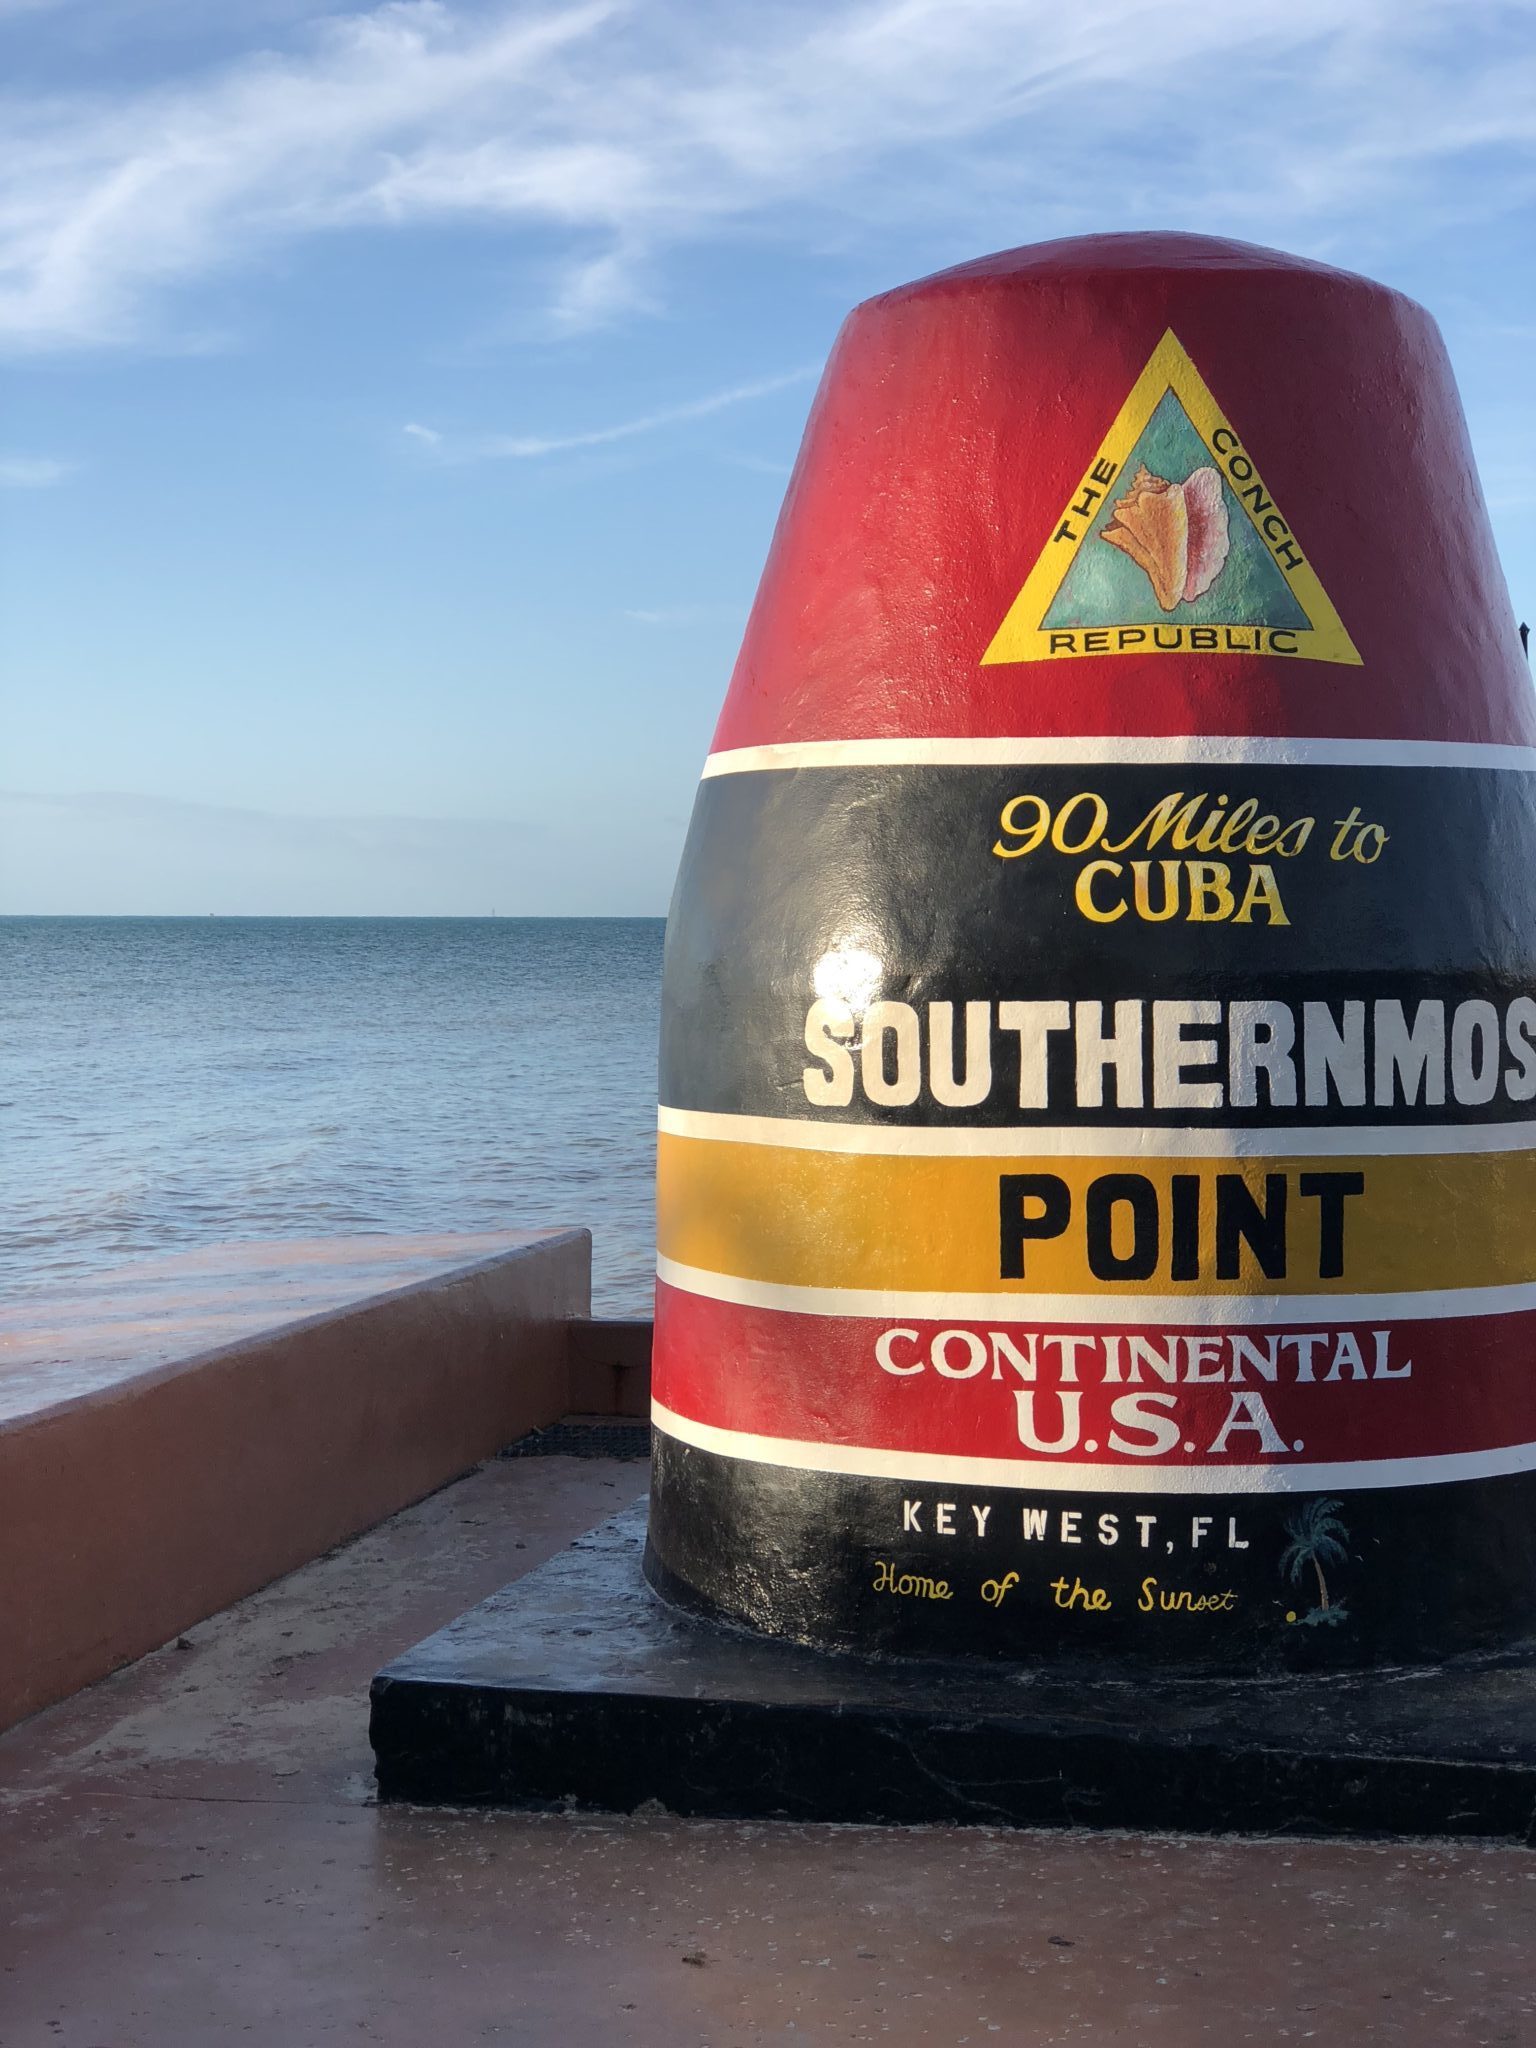 25 Must Do and See Things in Key West